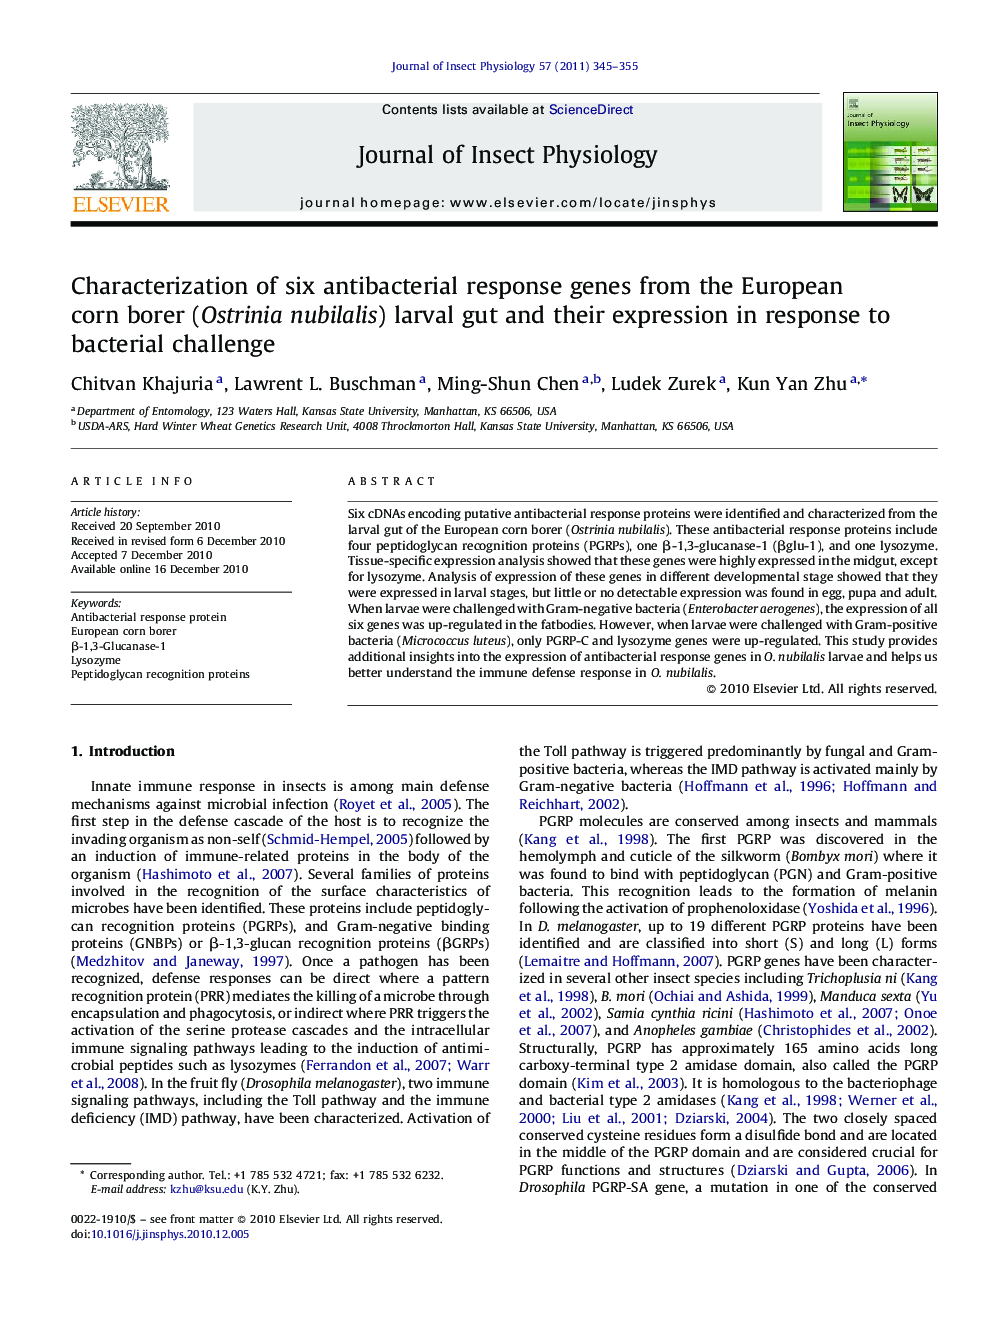 Characterization of six antibacterial response genes from the European corn borer (Ostrinia nubilalis) larval gut and their expression in response to bacterial challenge